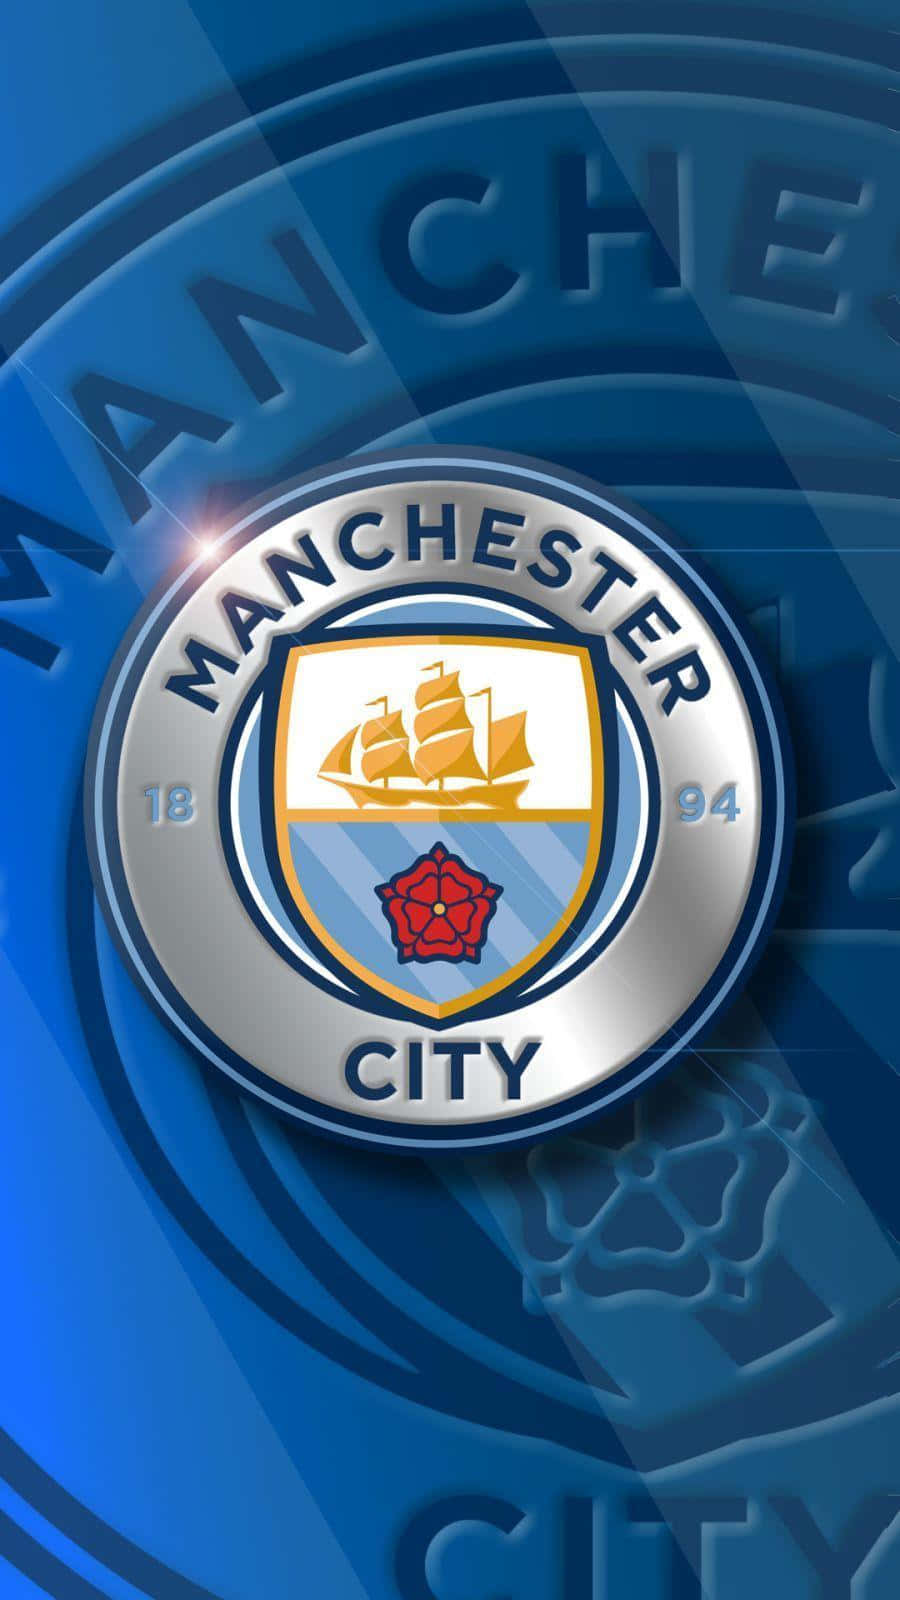 Feel the Power of Manchester City on your iPhone Wallpaper